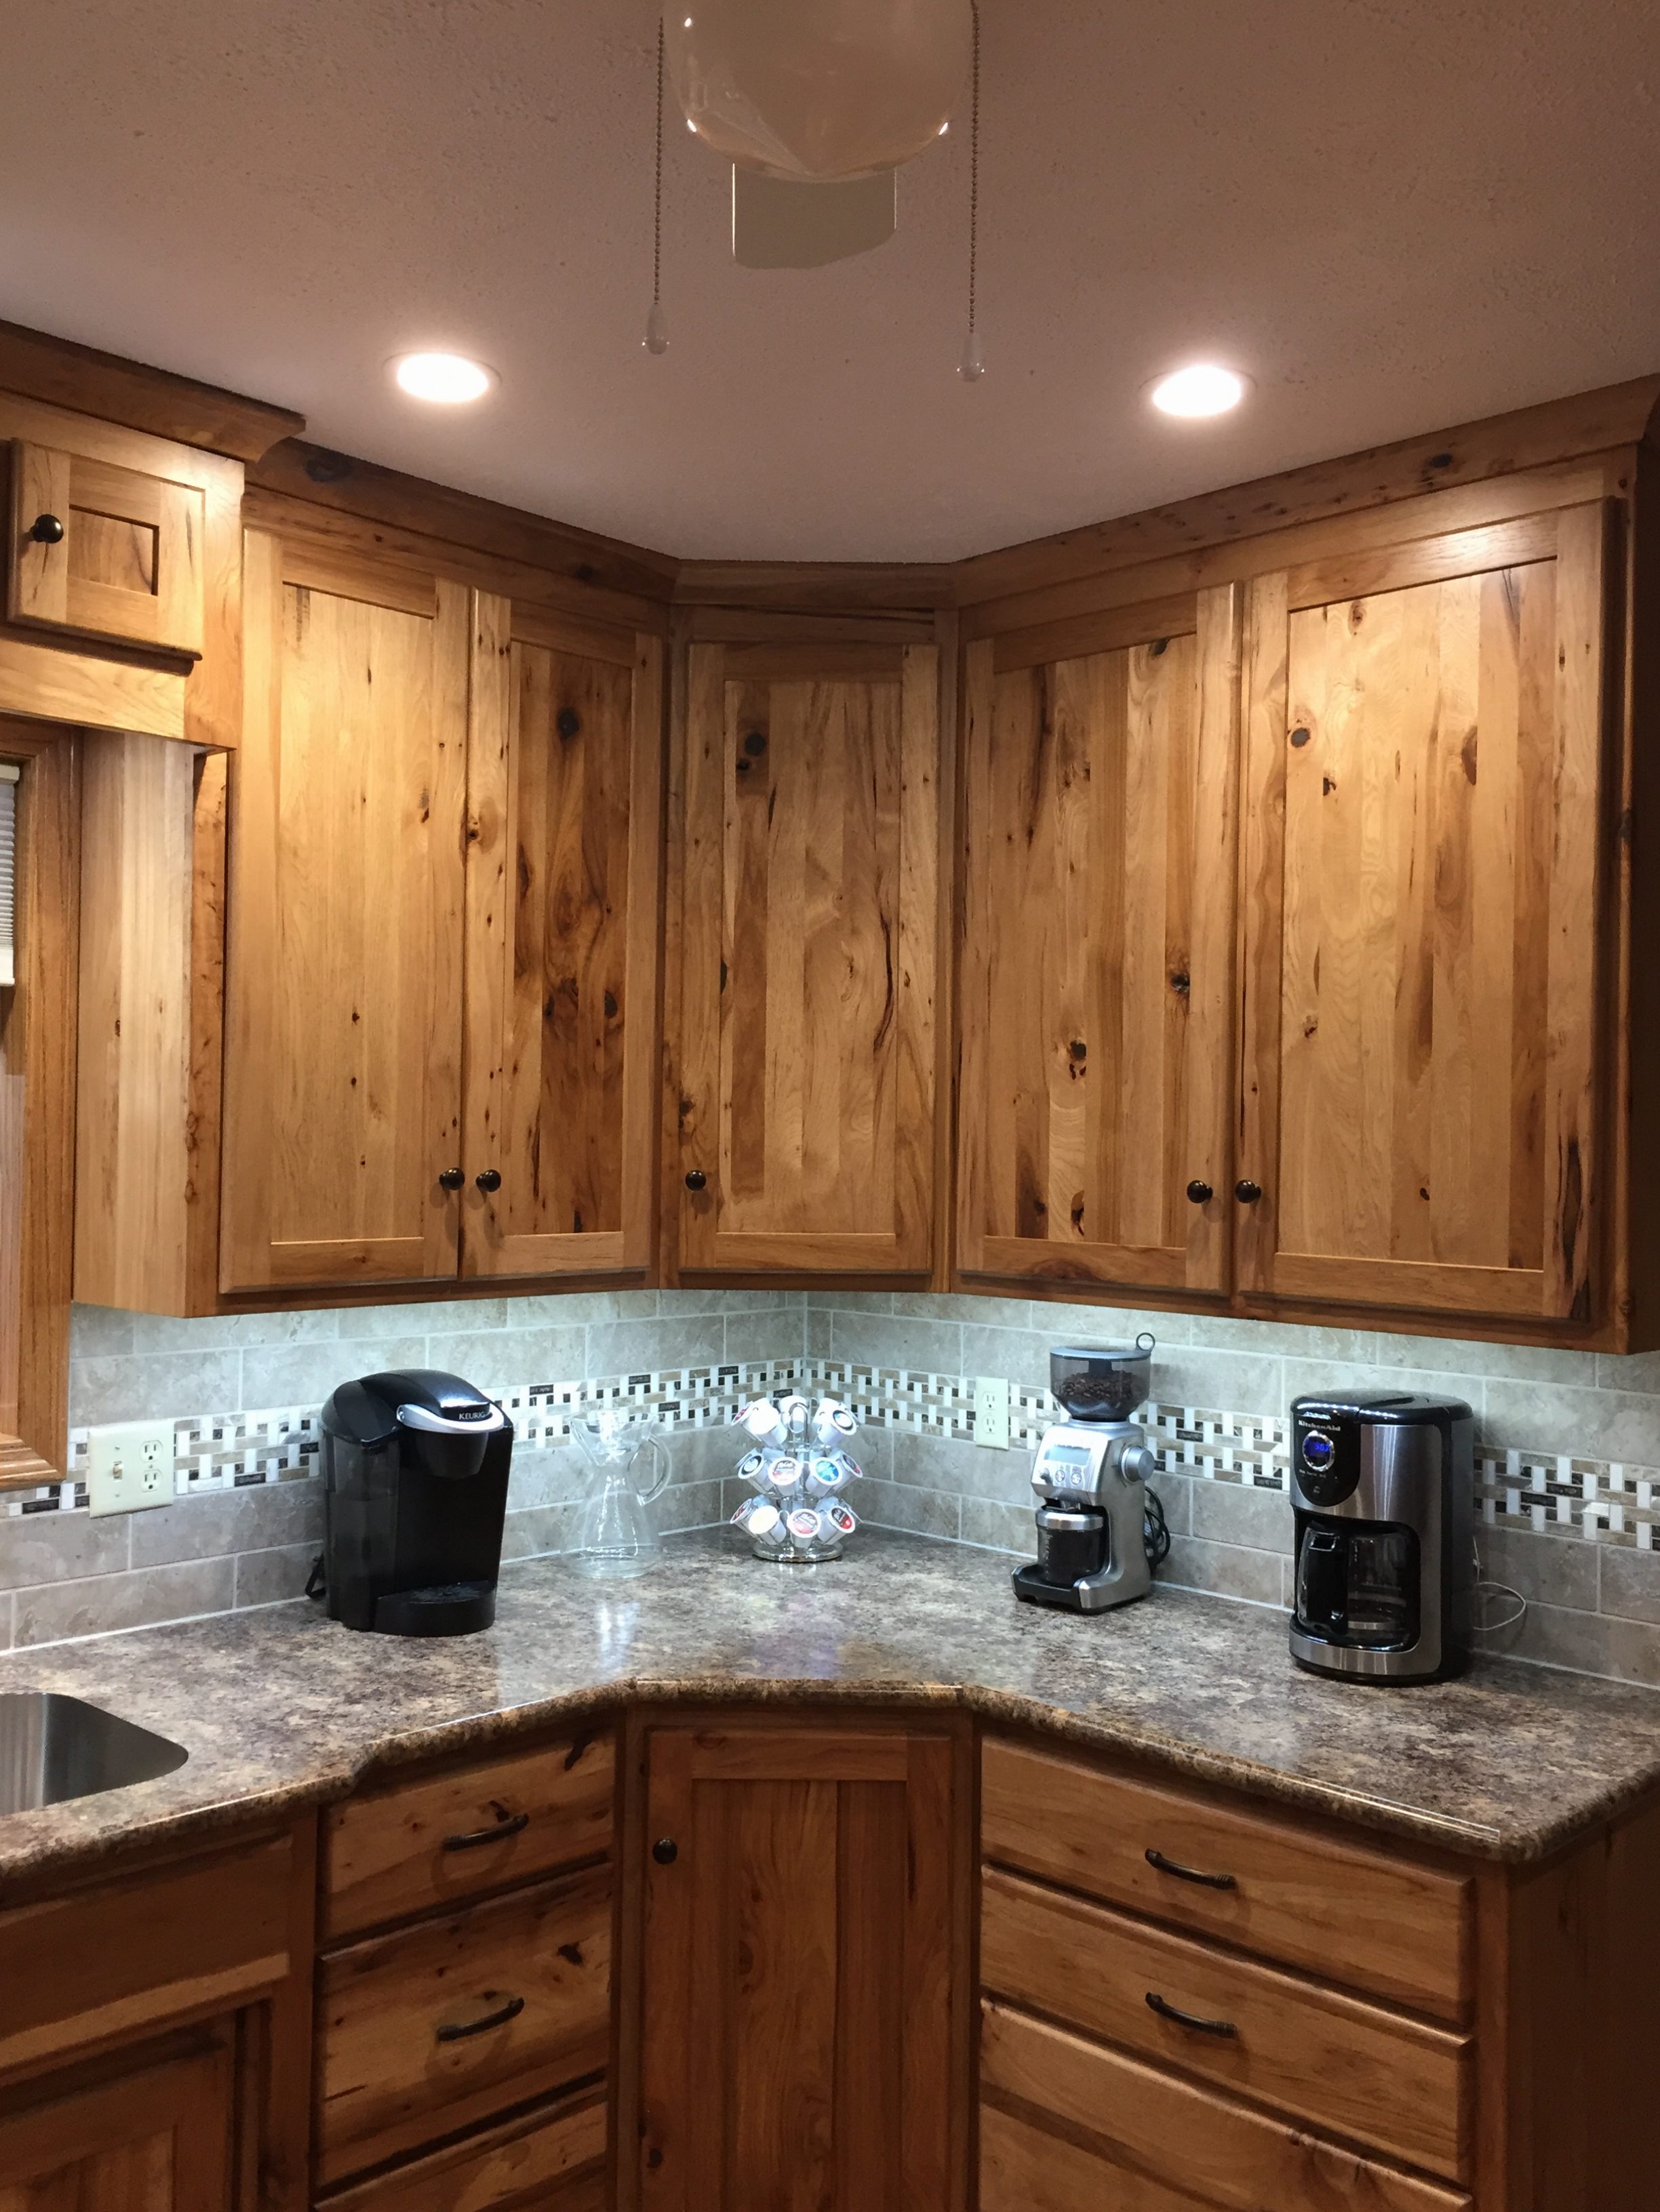 Rustic Hickory Kitchen Cabinets – Wheatstate Wood Design